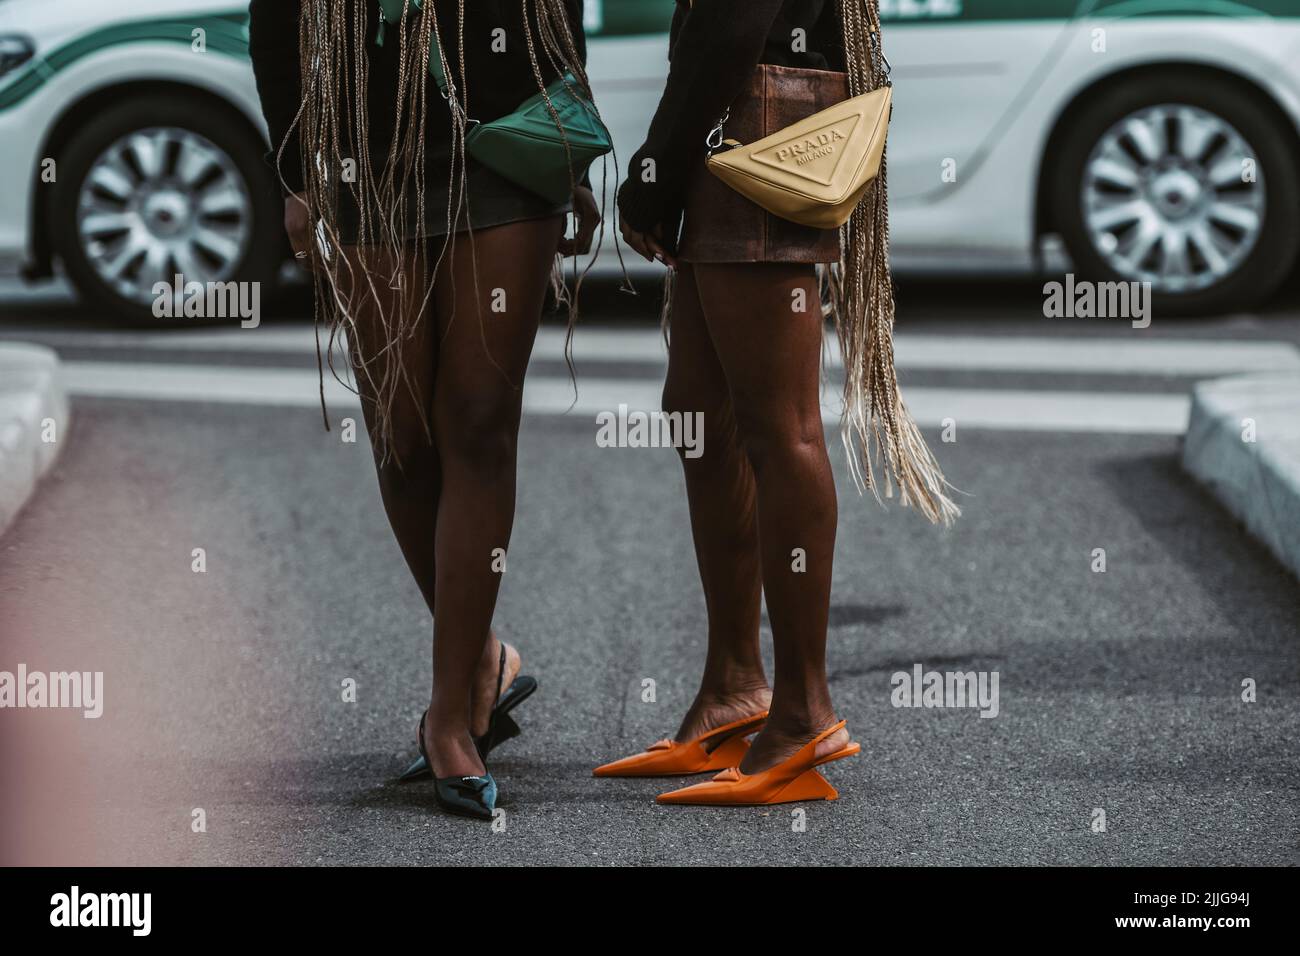 MILAN, ITALY - FEBRUARY 24: Street style outfit - girls wearing Prada purses and shoes. Stock Photo